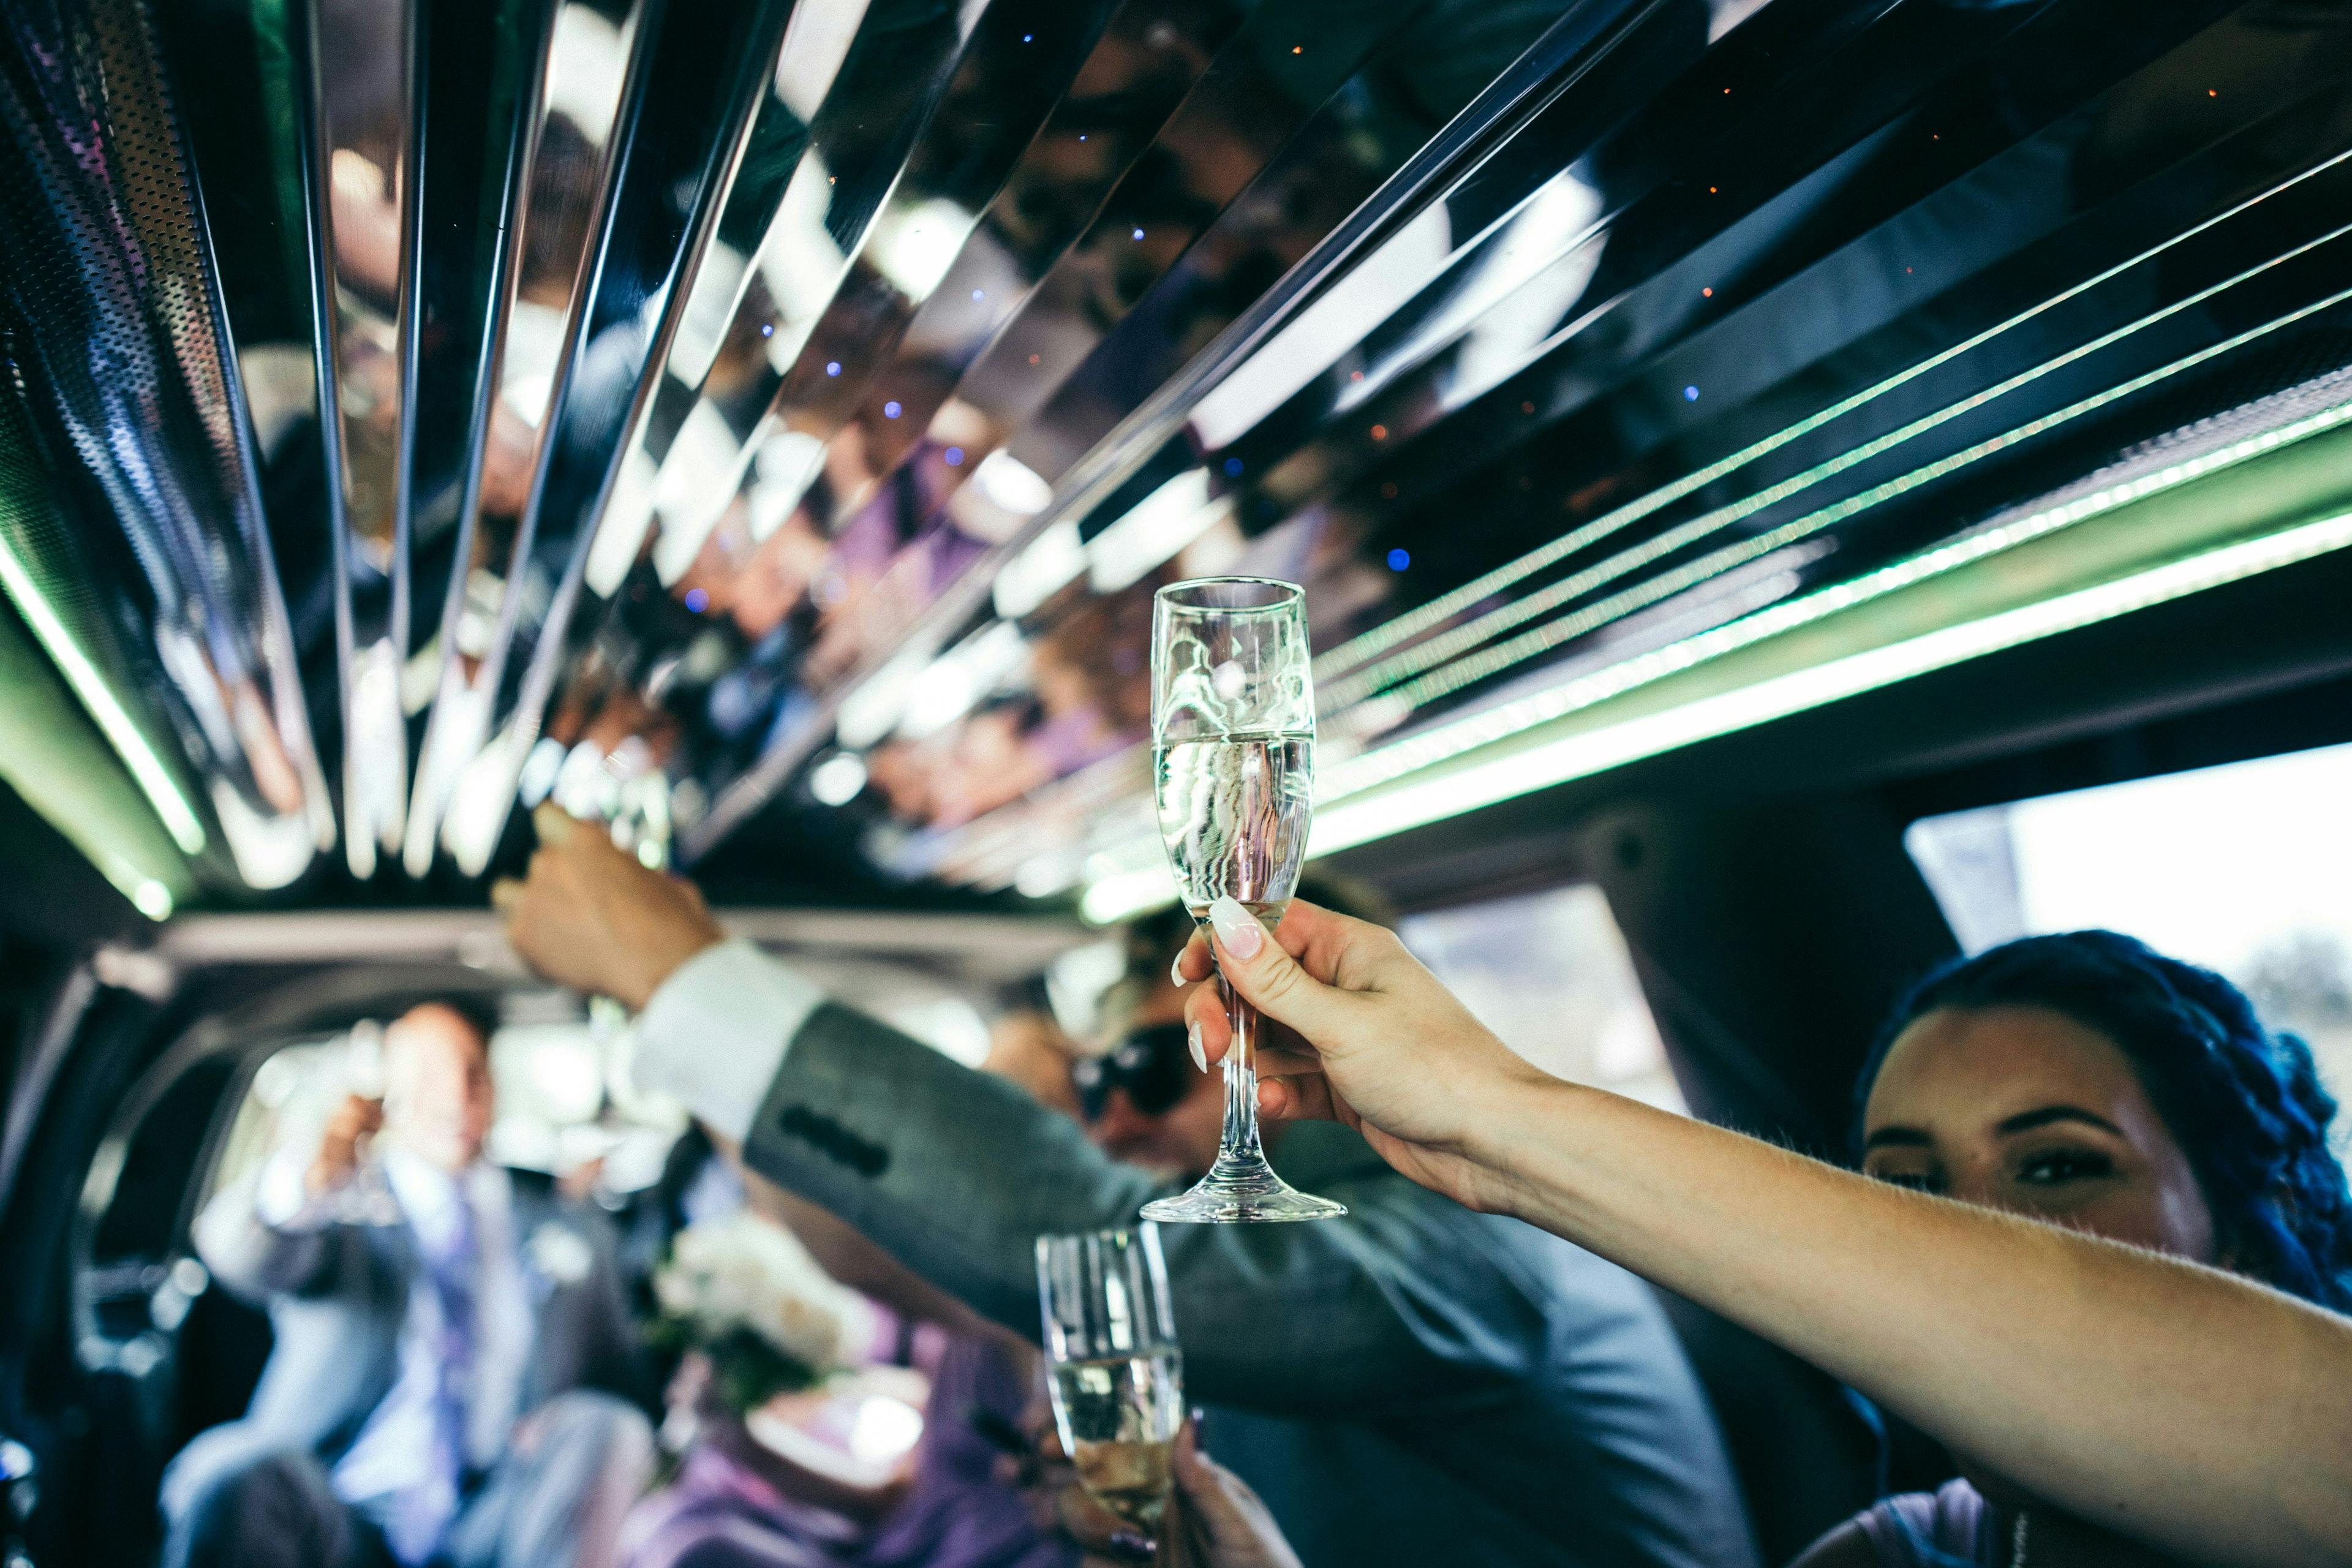 People in a luxury limousine having a good time drinking champagne